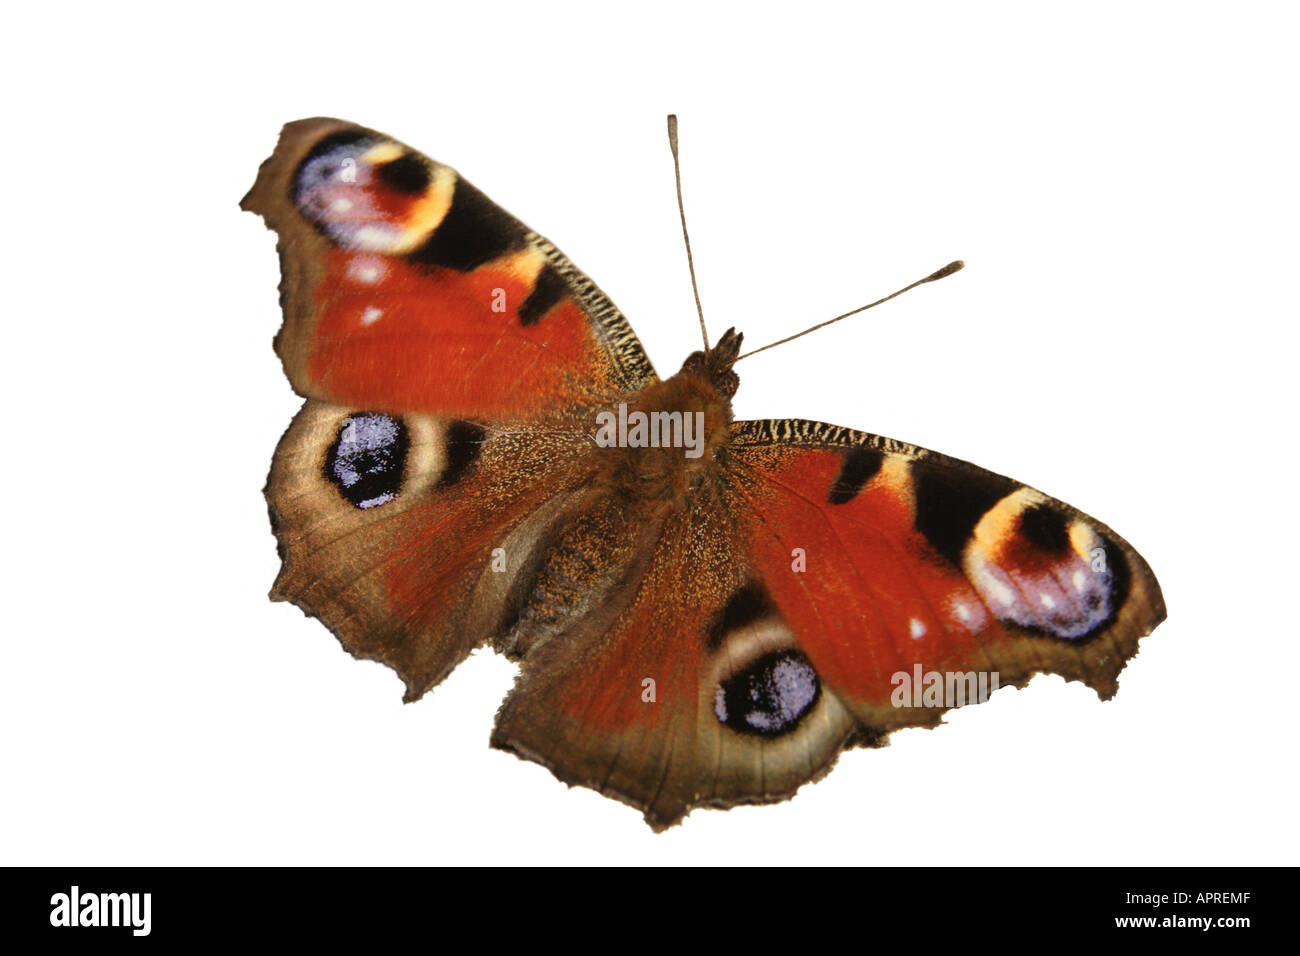 Peacock Butterfly Cutout. Stock Photo